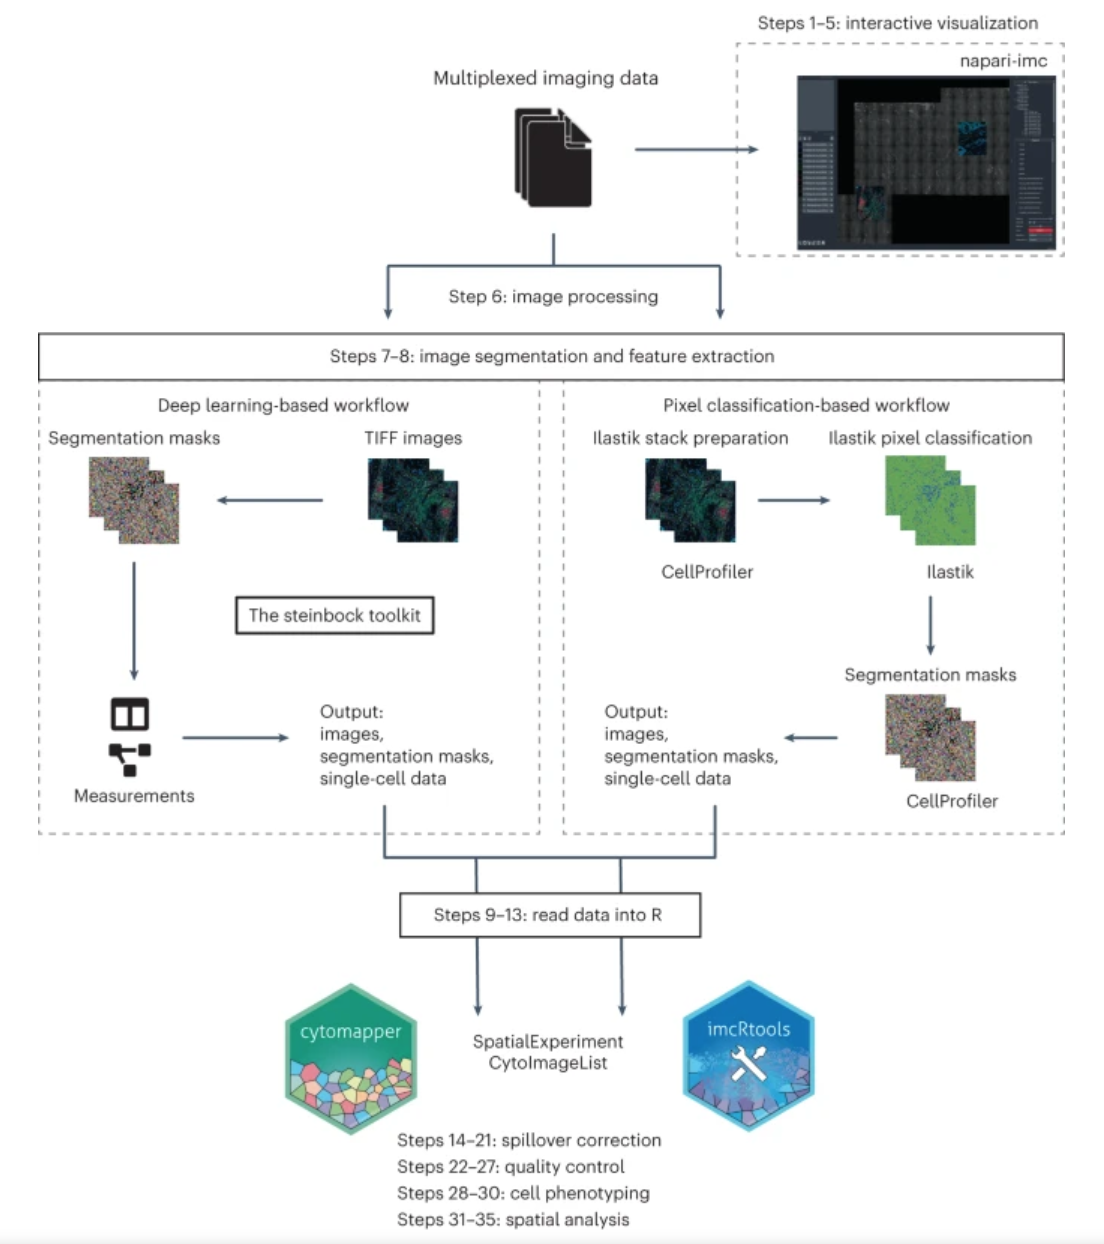 Fig. 1: Overview of the multiplexed tissue image analysis workflow.